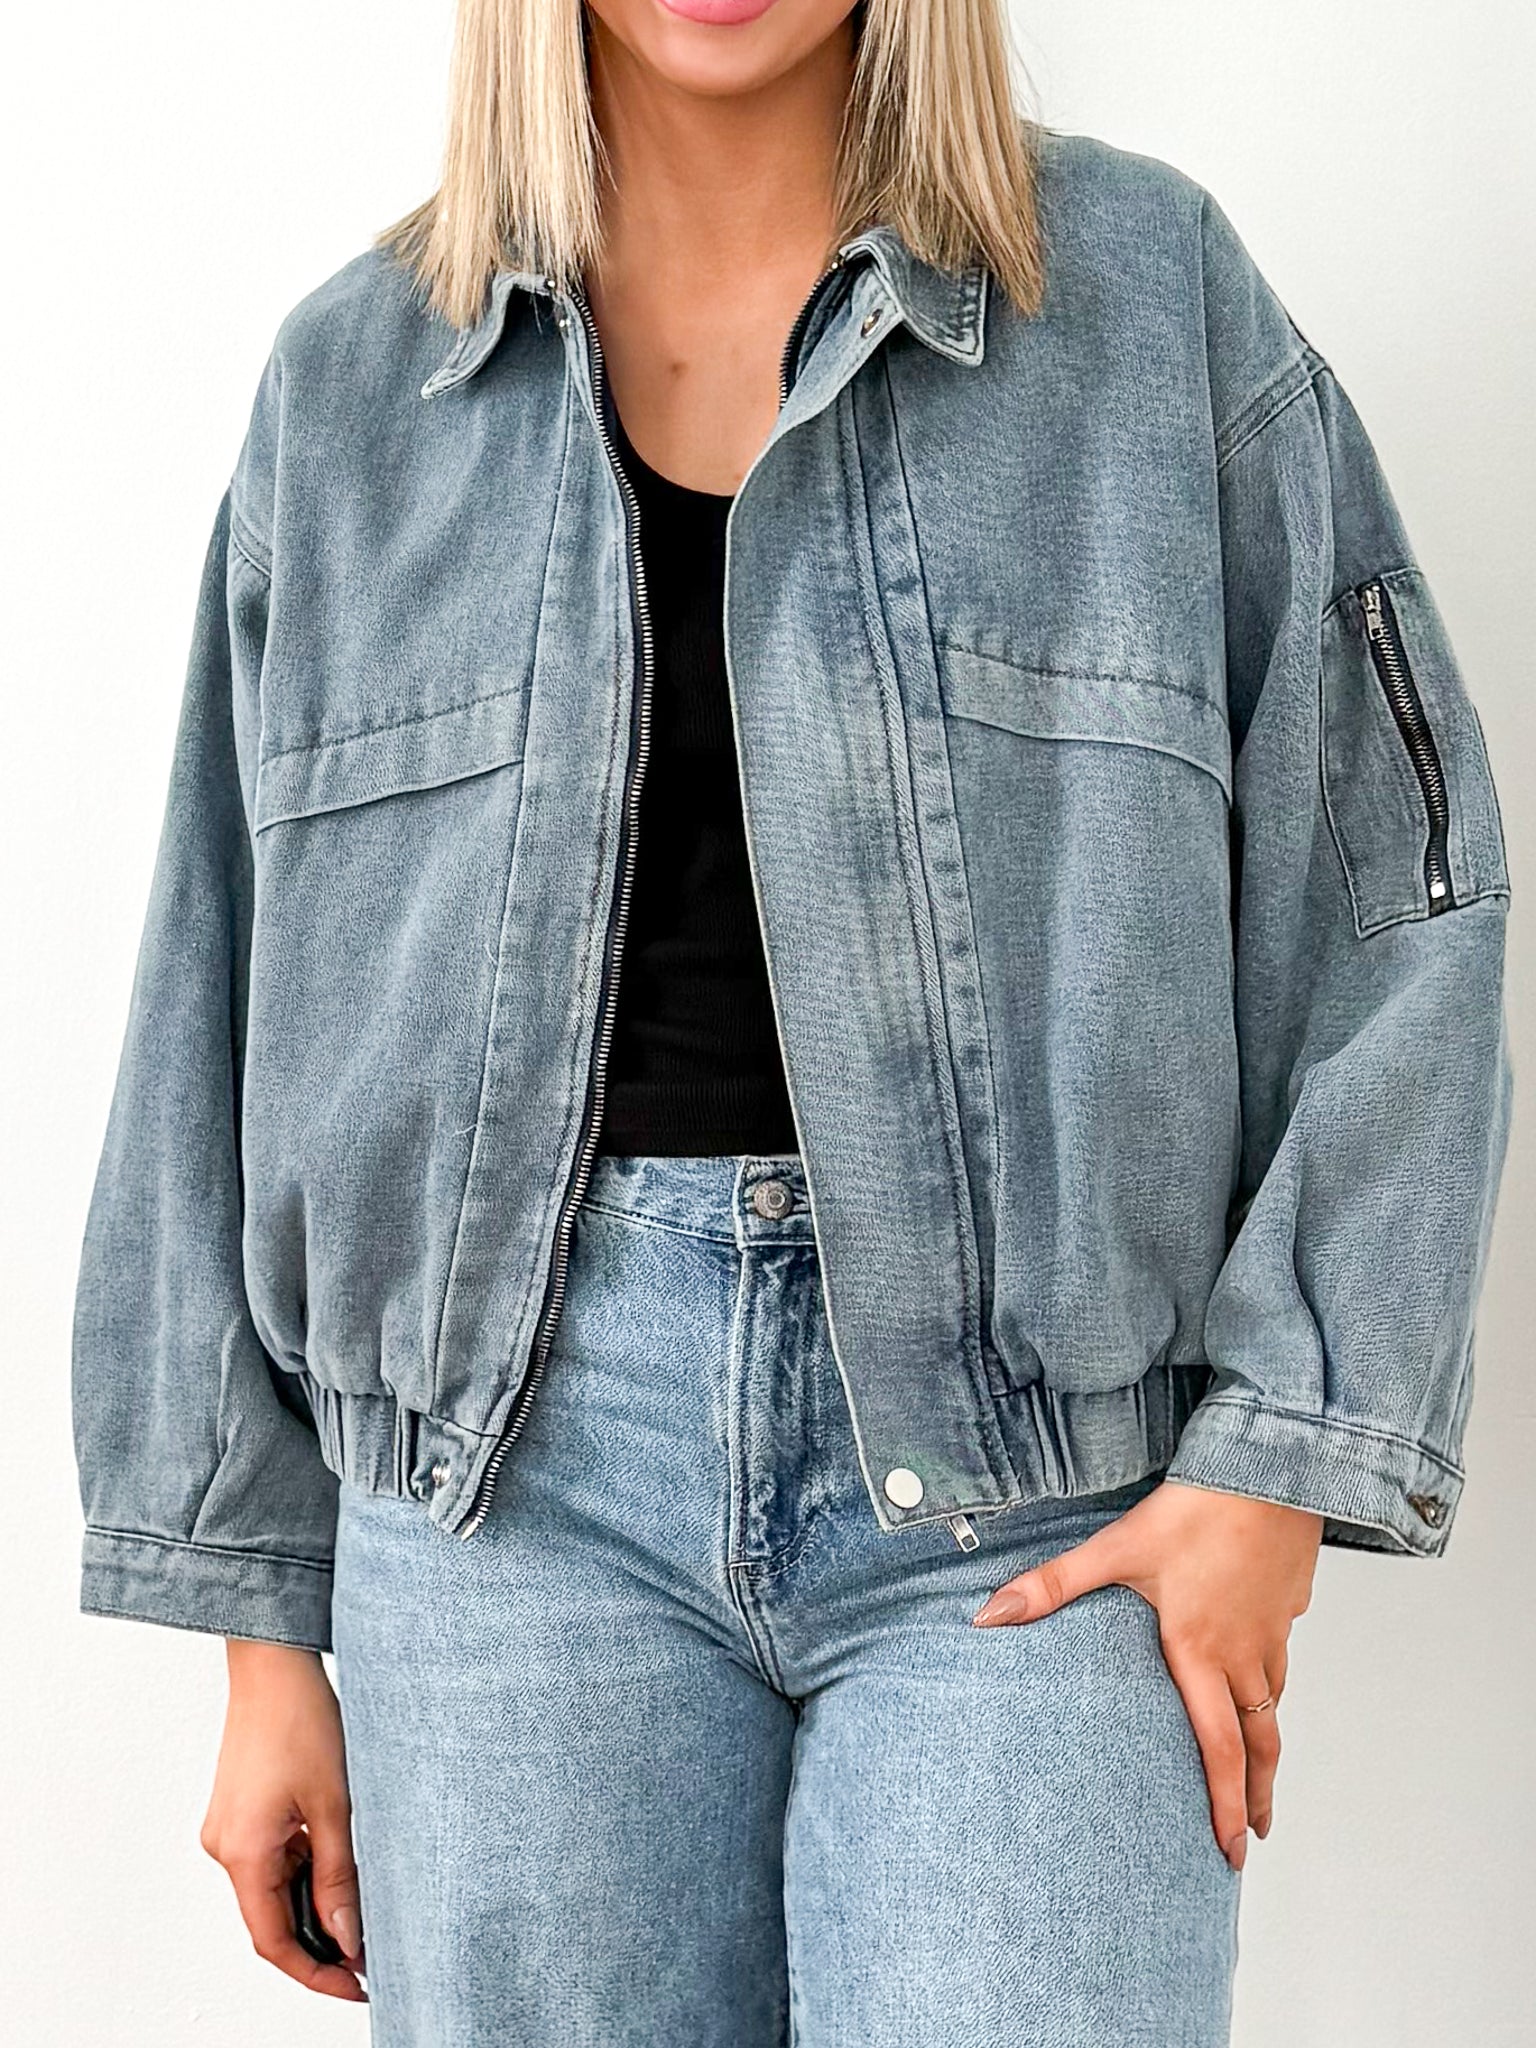 Which Denim jacket would look good on a Pure Dramatic? : r/Kibbe